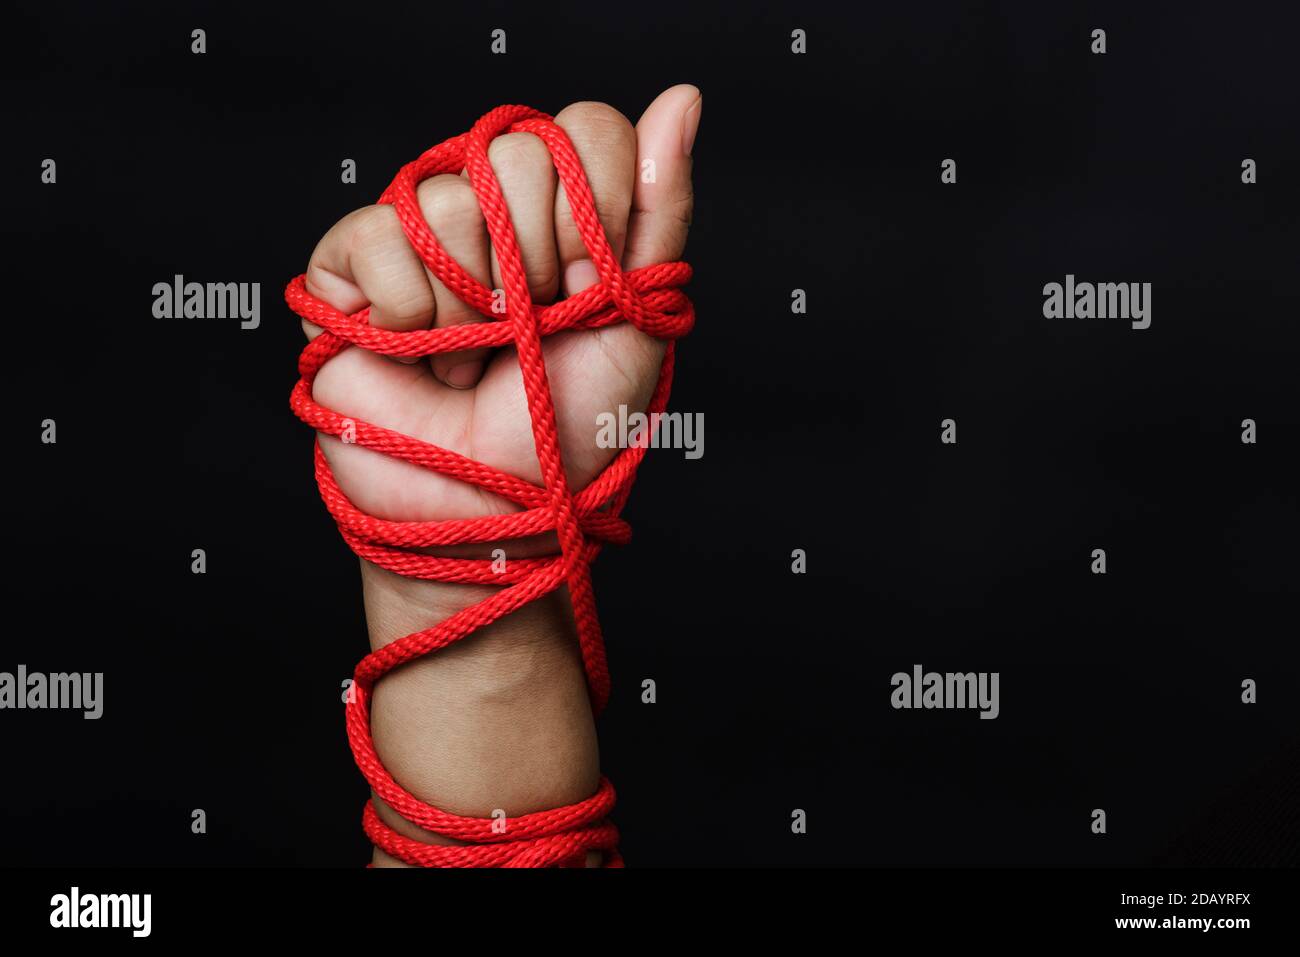 Woman hand tied up with rope on black background, Human trafficking and abuse, International Human Rights day Stock Photo